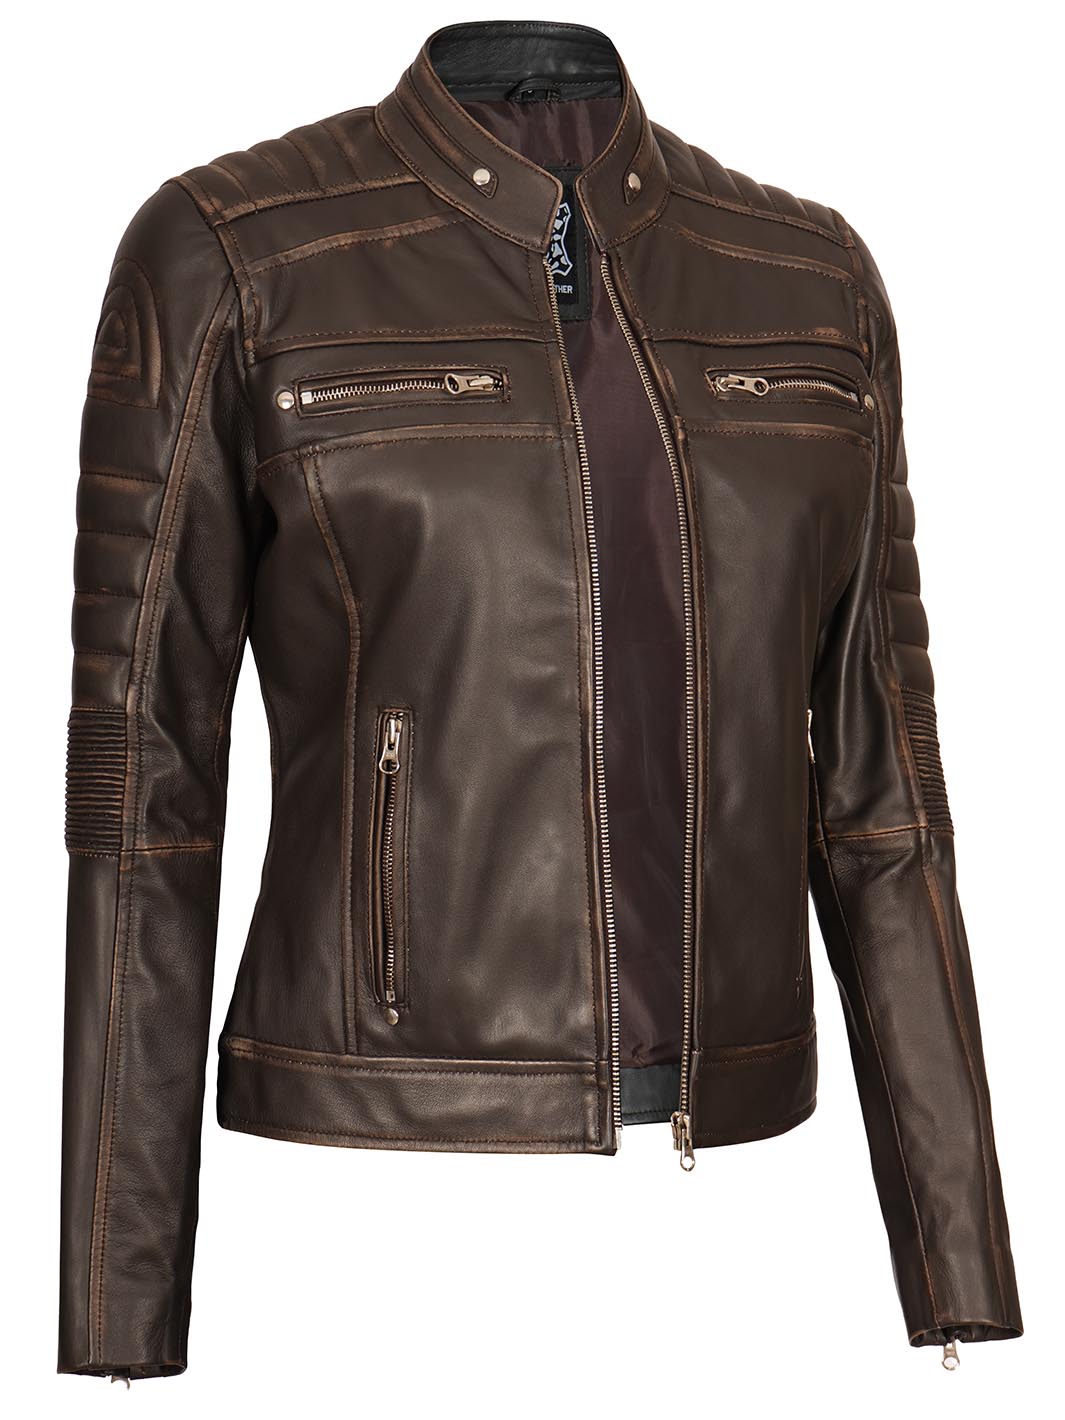 Womens Cafe Racer Brown Leather Jacket